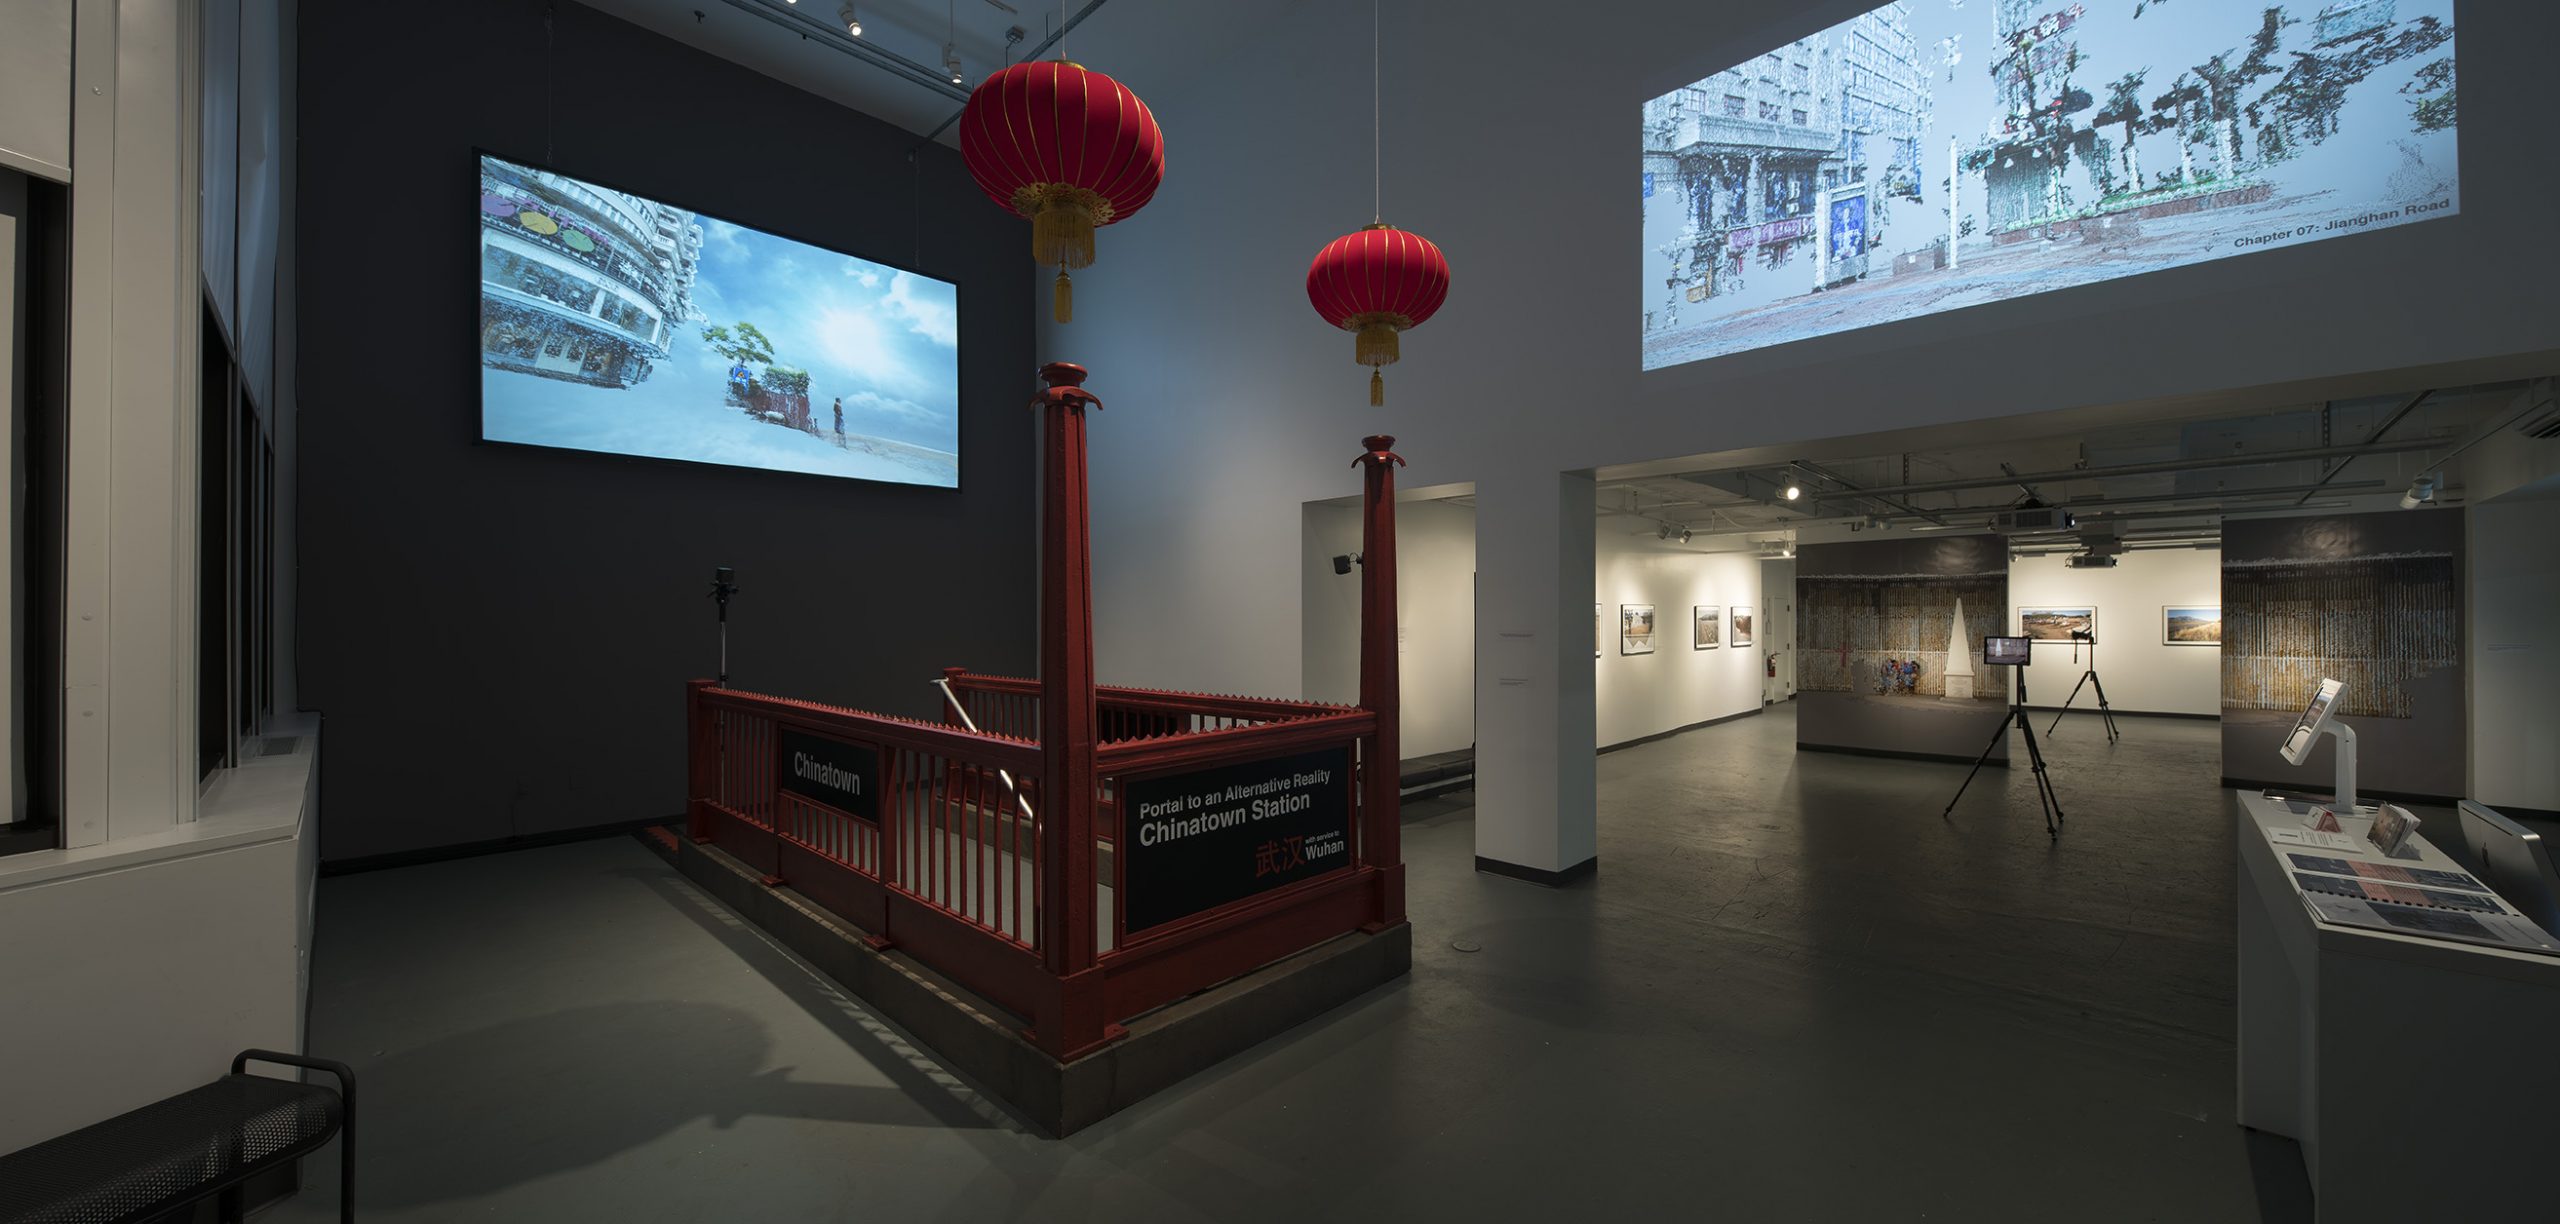 alternative reality videos and chinatown station replica